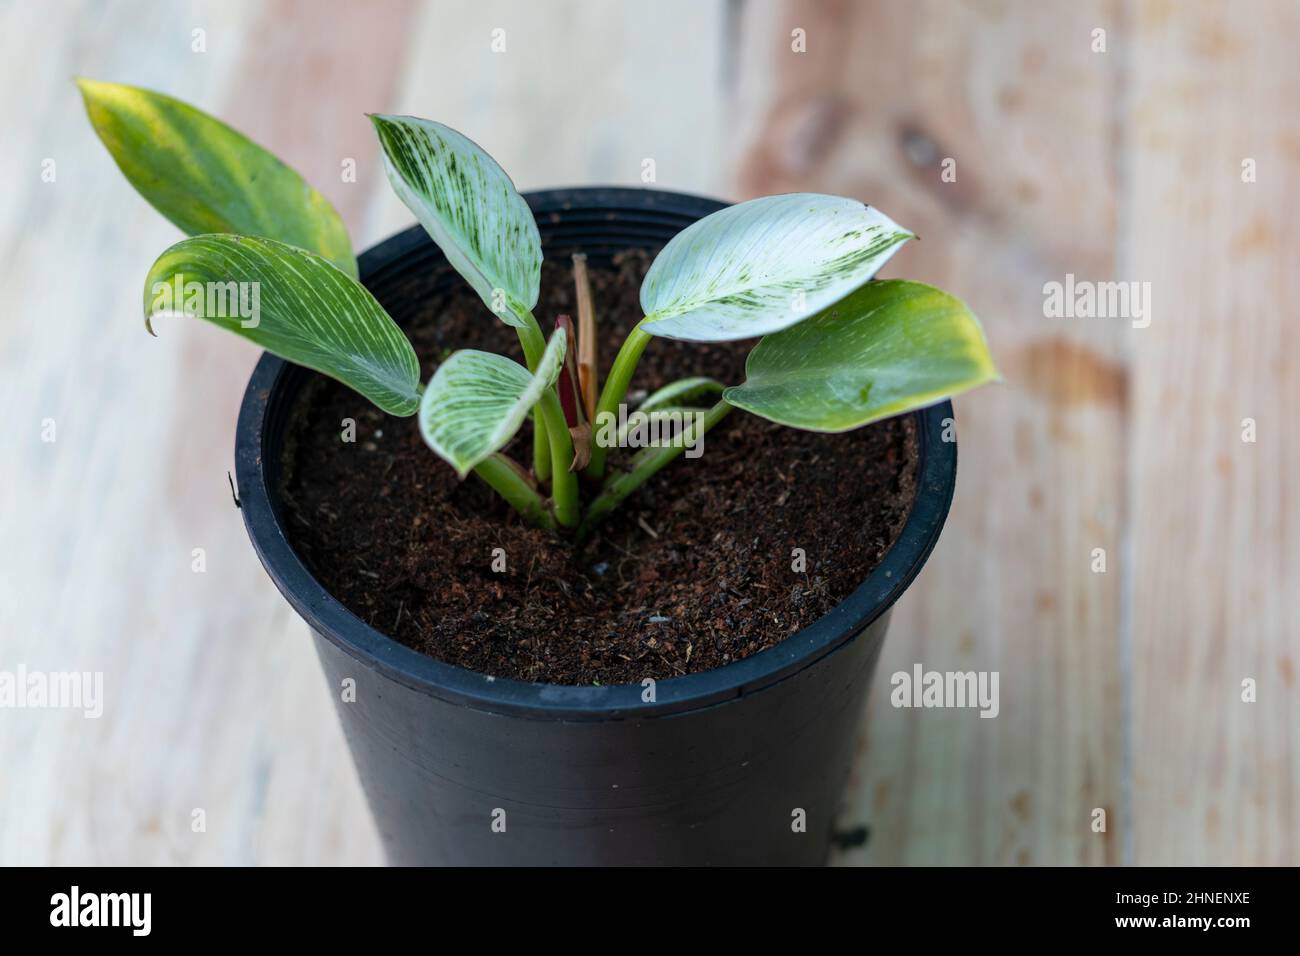 Philodendron Birkin plant with white variegation Stock Photo